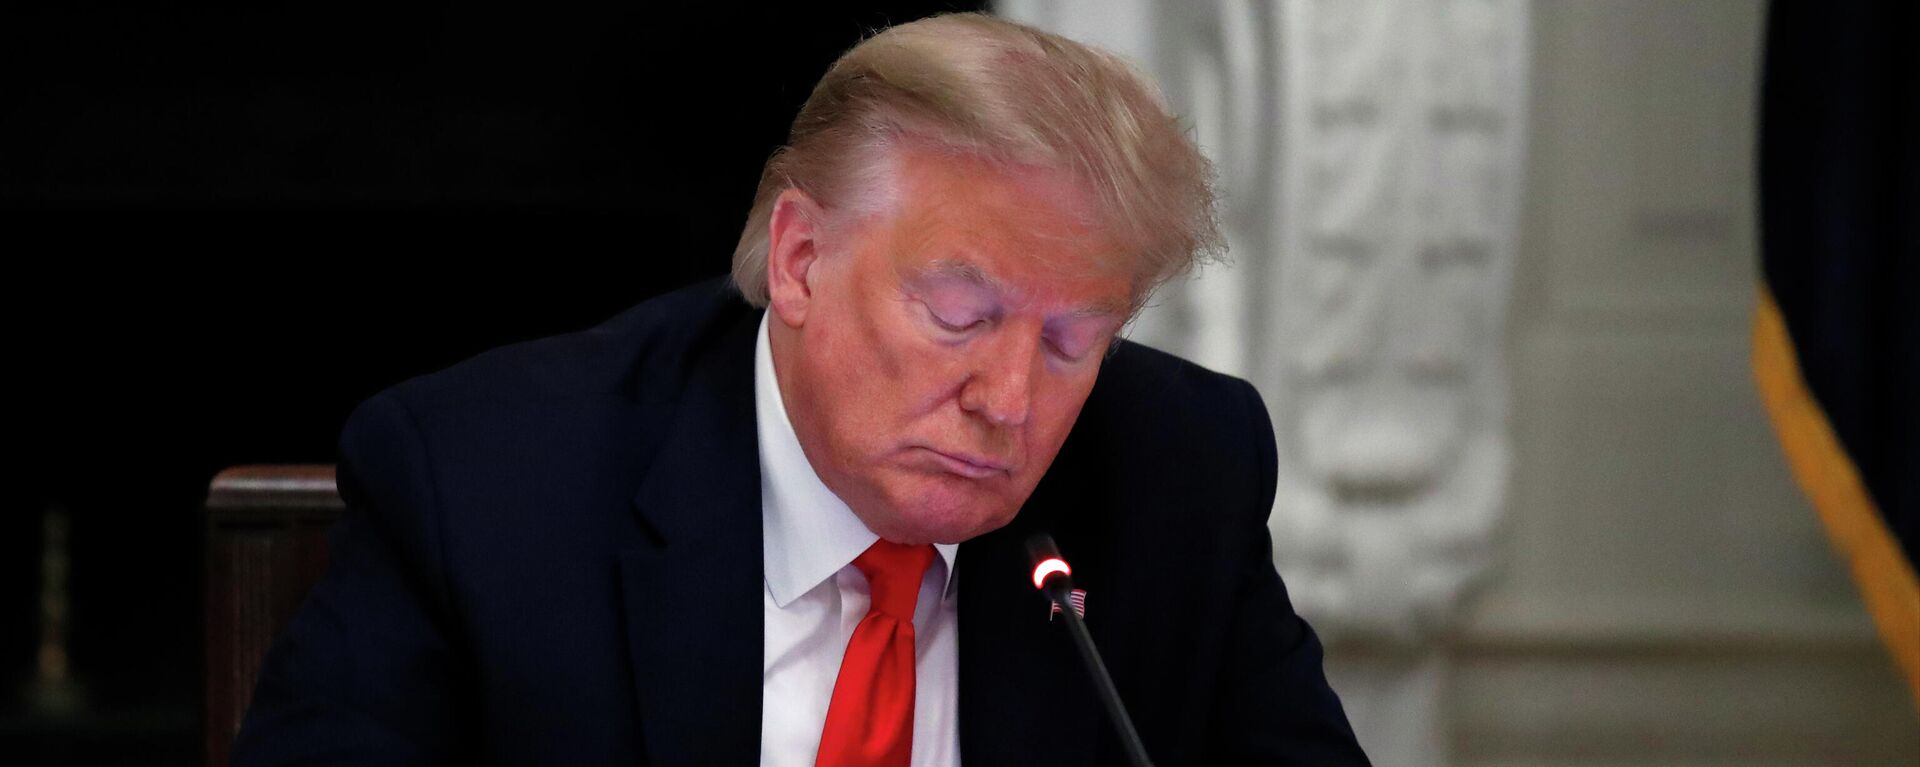  In this Thursday, June 18, 2020 file photo, President Donald Trump looks at his phone during a roundtable with governors on the reopening of America's small businesses, in the State Dining Room of the White House in Washington. - Sputnik International, 1920, 05.04.2022